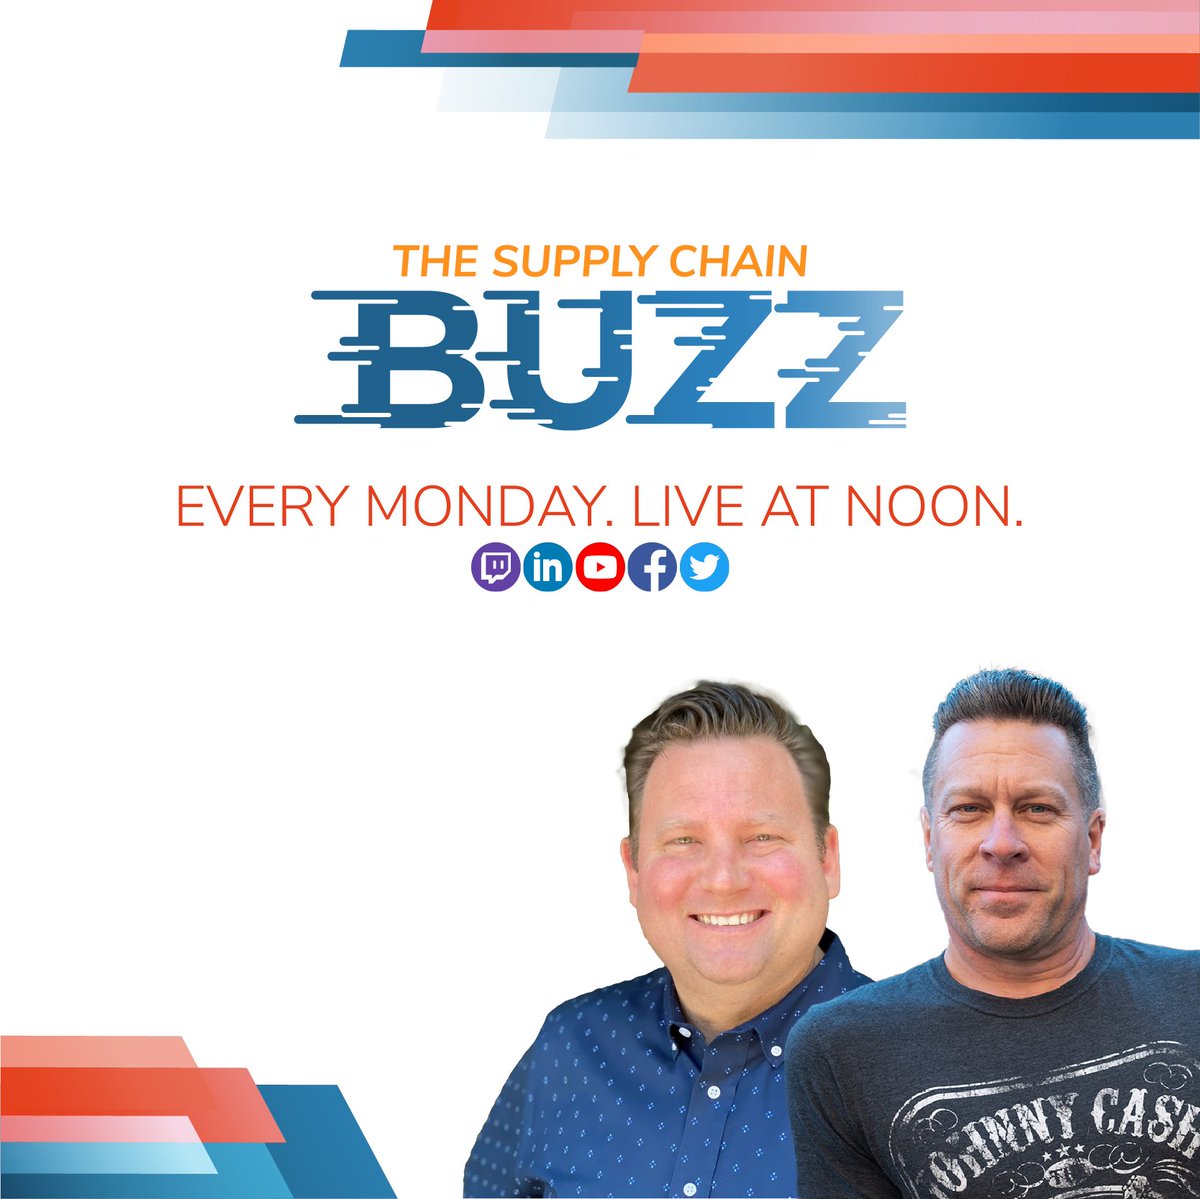 Join BUZZ DAY every Monday! Tune in at 12 noon ET to catch @ScottWLuton and @gregoryswhite discussing the latest supply chain news and trends.  

Join the NOW community to receive updates & more: bit.ly/3mtxICs 
#supplychainbuzz #news #globalsupplychain #supplychain